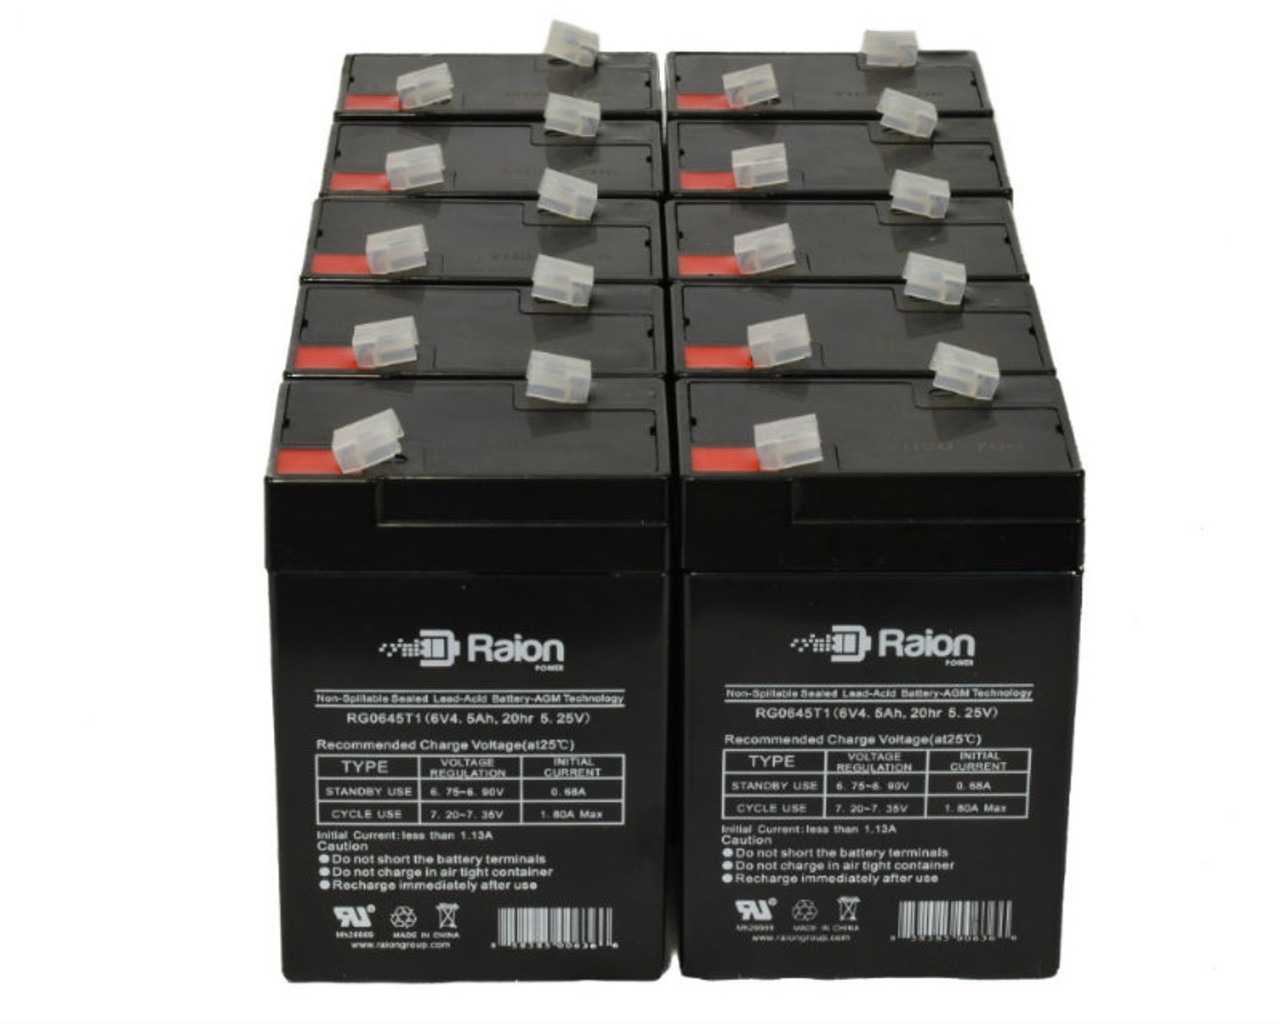 Raion Power 6 Volt 4.5Ah RG0645T1 Replacement Battery for MHB MS4.5-6 - 10 Pack